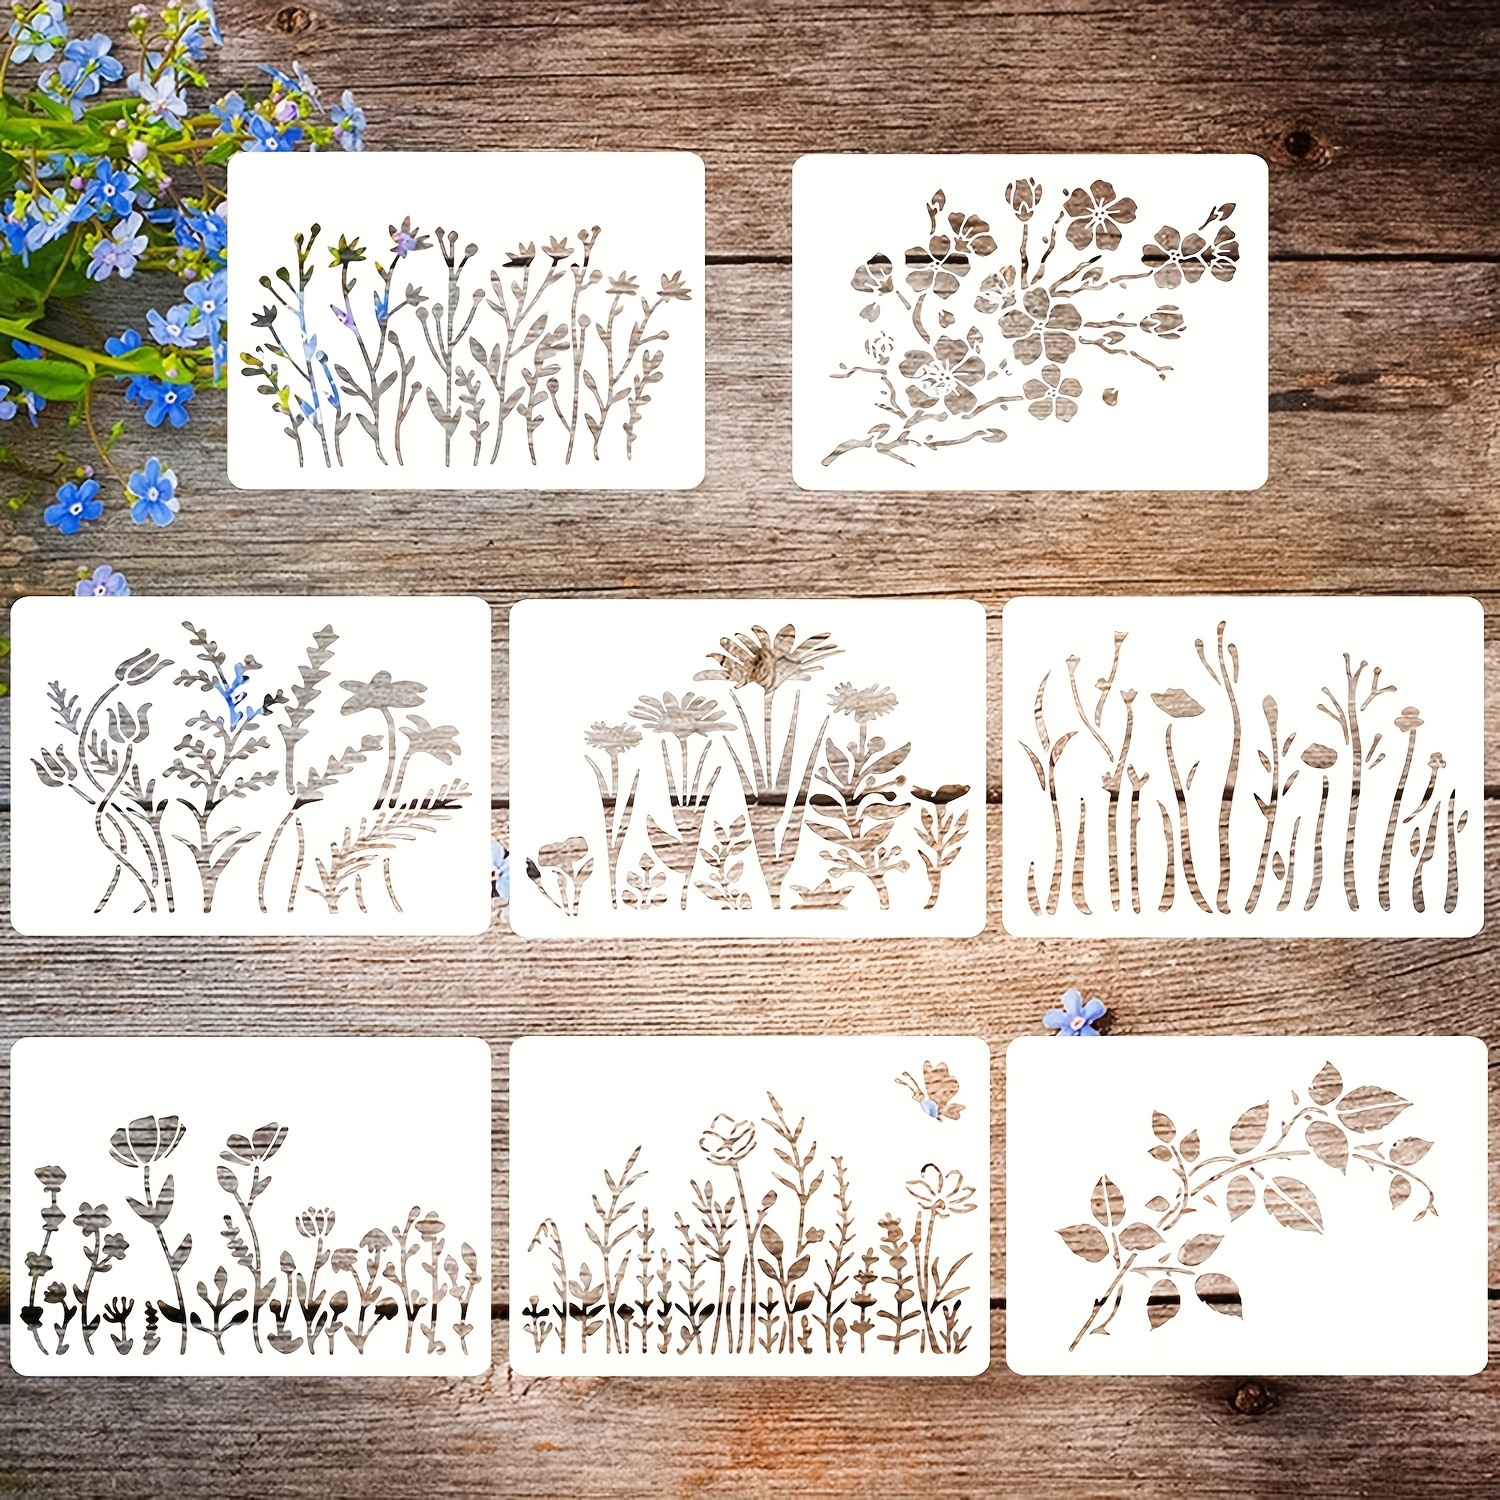 

8pcs Reusable Stencils For Crafts, Wild Flower Stencils Art Painting Template, Drawing Stencils For Diy Walls Doors Window Furniture Wood, 4.7 X 5.9 Inch